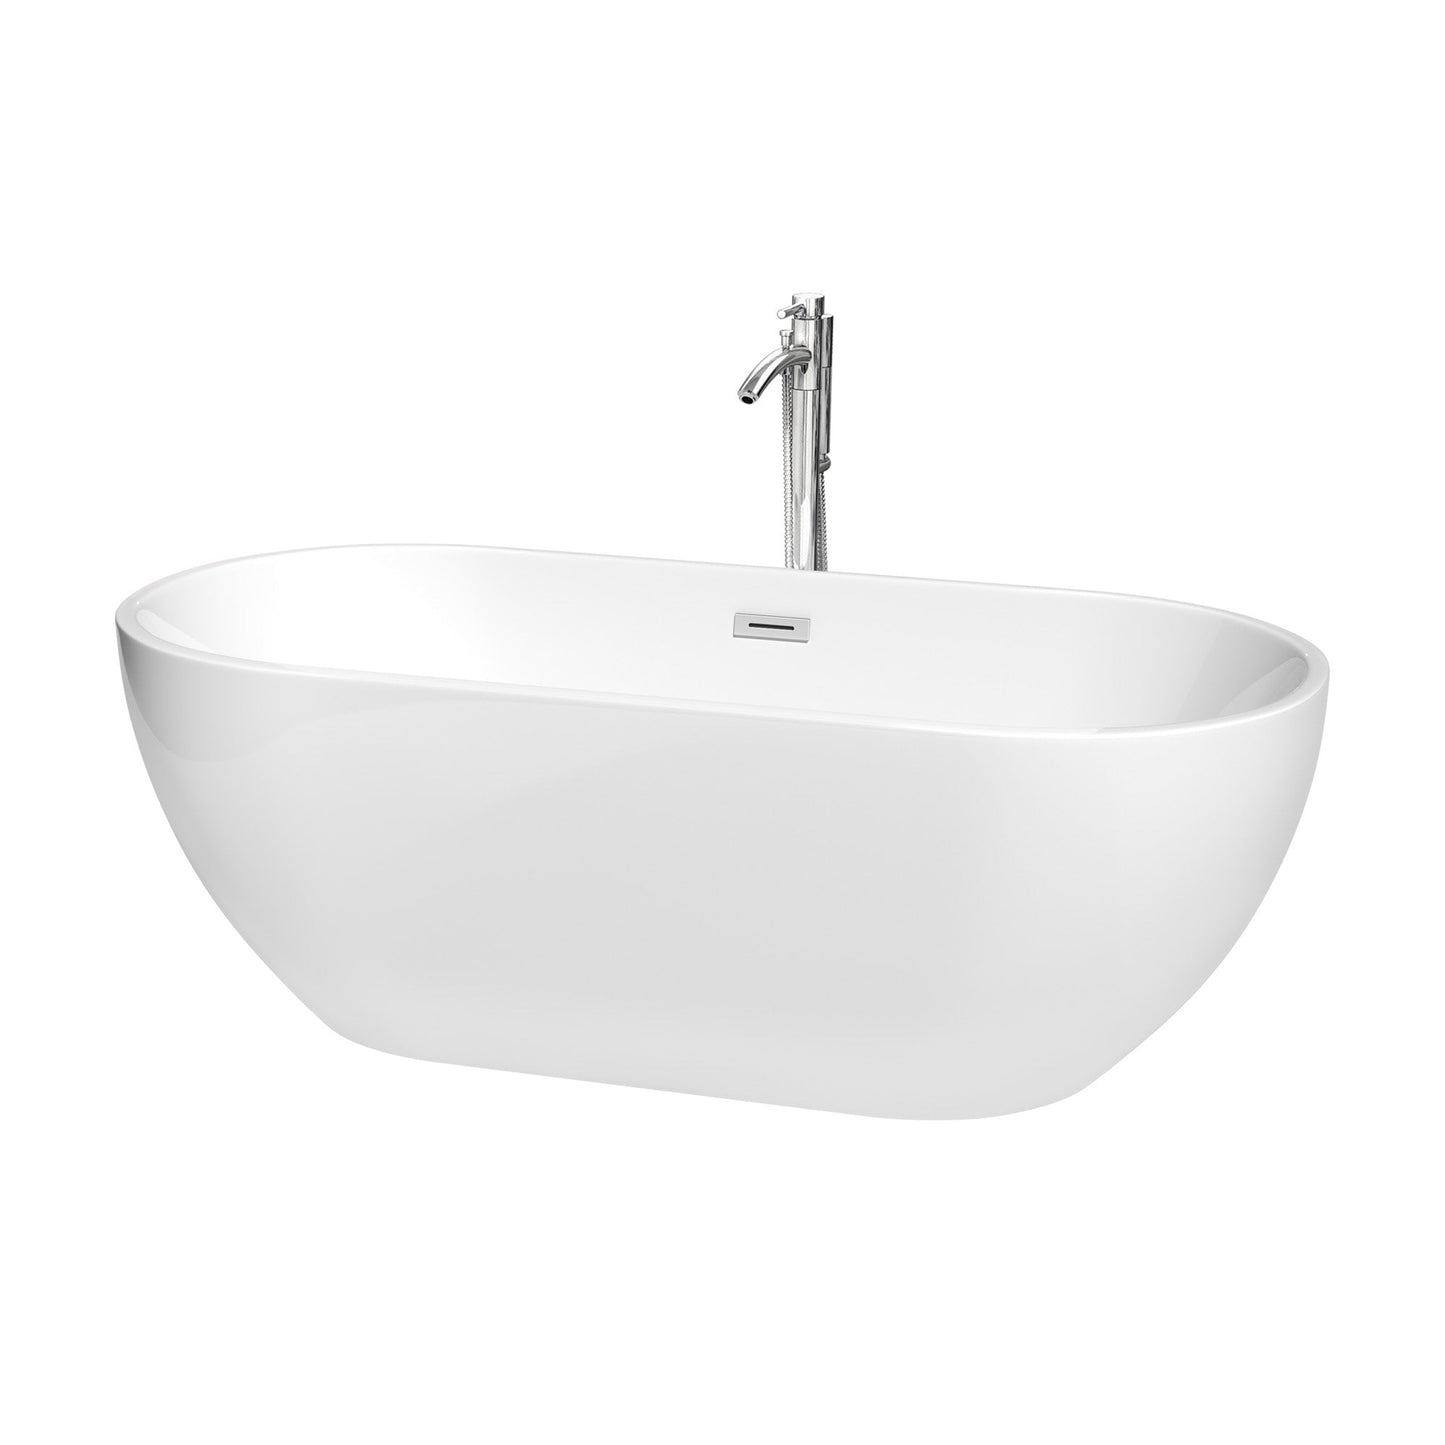 Wyndham Collection Brooklyn 67" Freestanding Bathtub in White With Floor Mounted Faucet, Drain and Overflow Trim in Polished Chrome